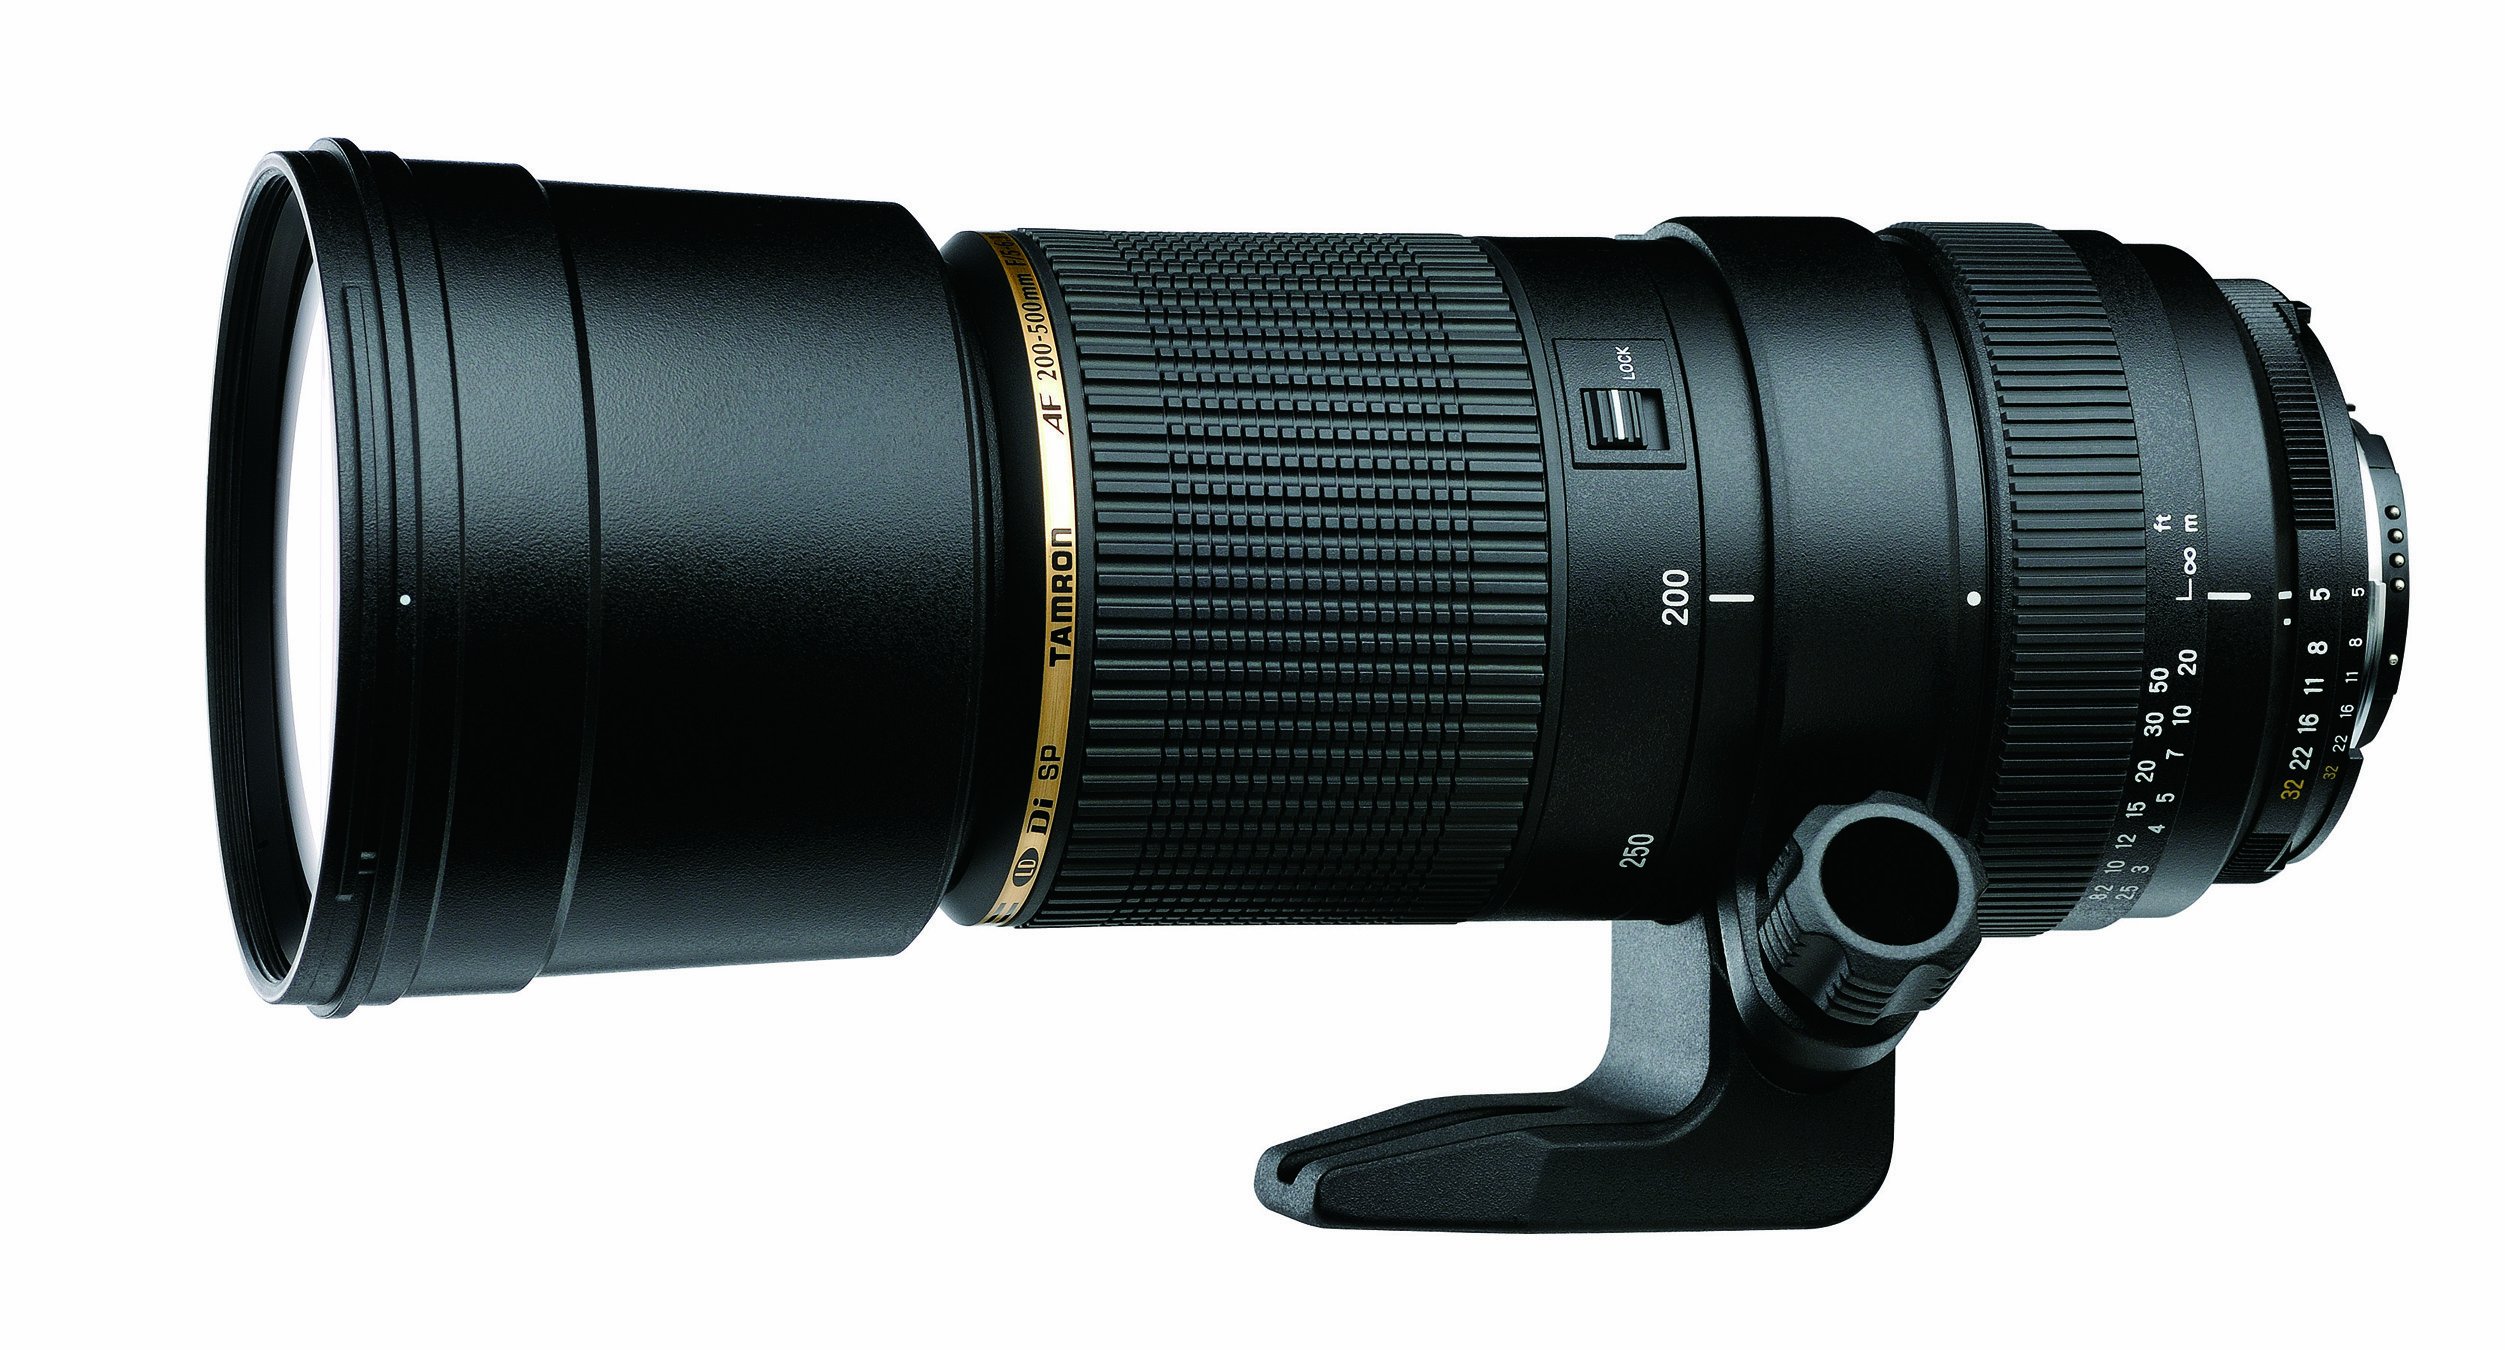 Ống kính Tamron Auto Focus 200-500mm f/5.0-6.3 Di LD SP FEC (IF) Lens for Nikon Digital SLR Cameras (Model A08N) (Discontinued by Manufacturer)